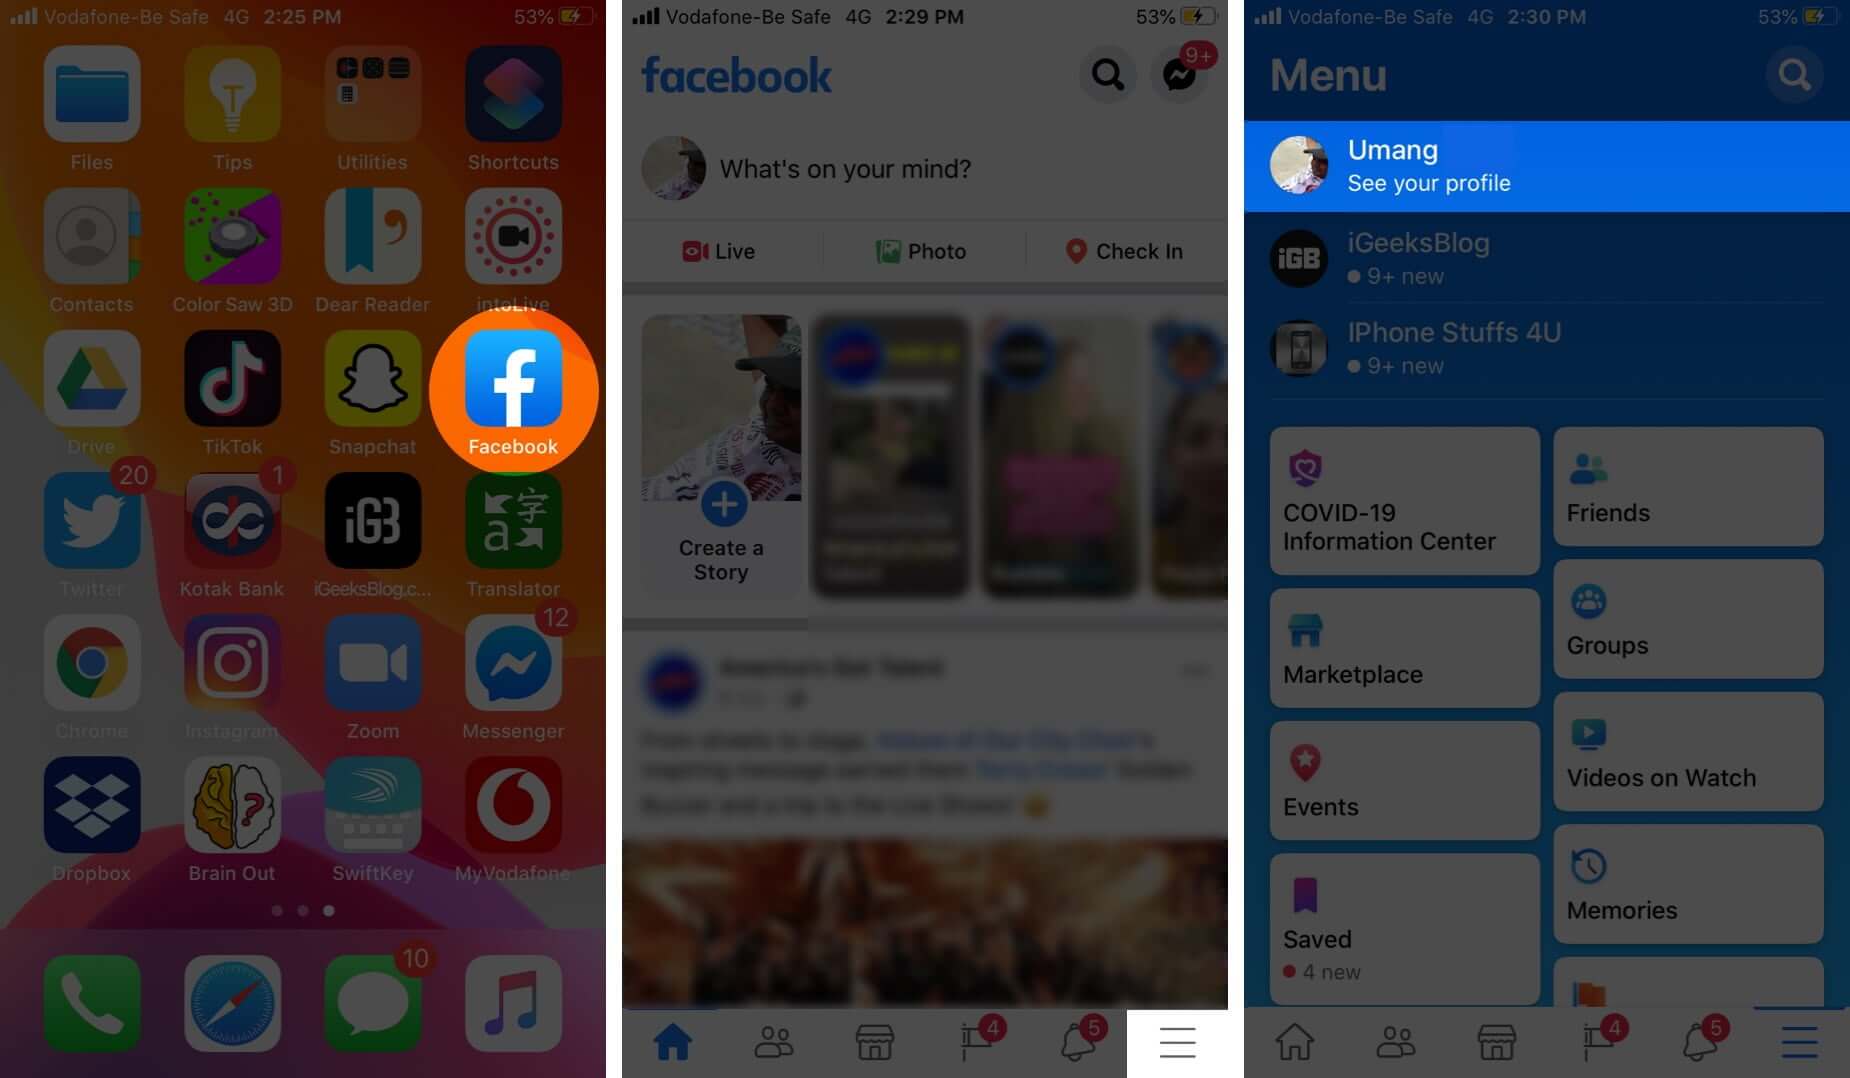 Open Facebook Tap on Menu and Then Tap on Profile